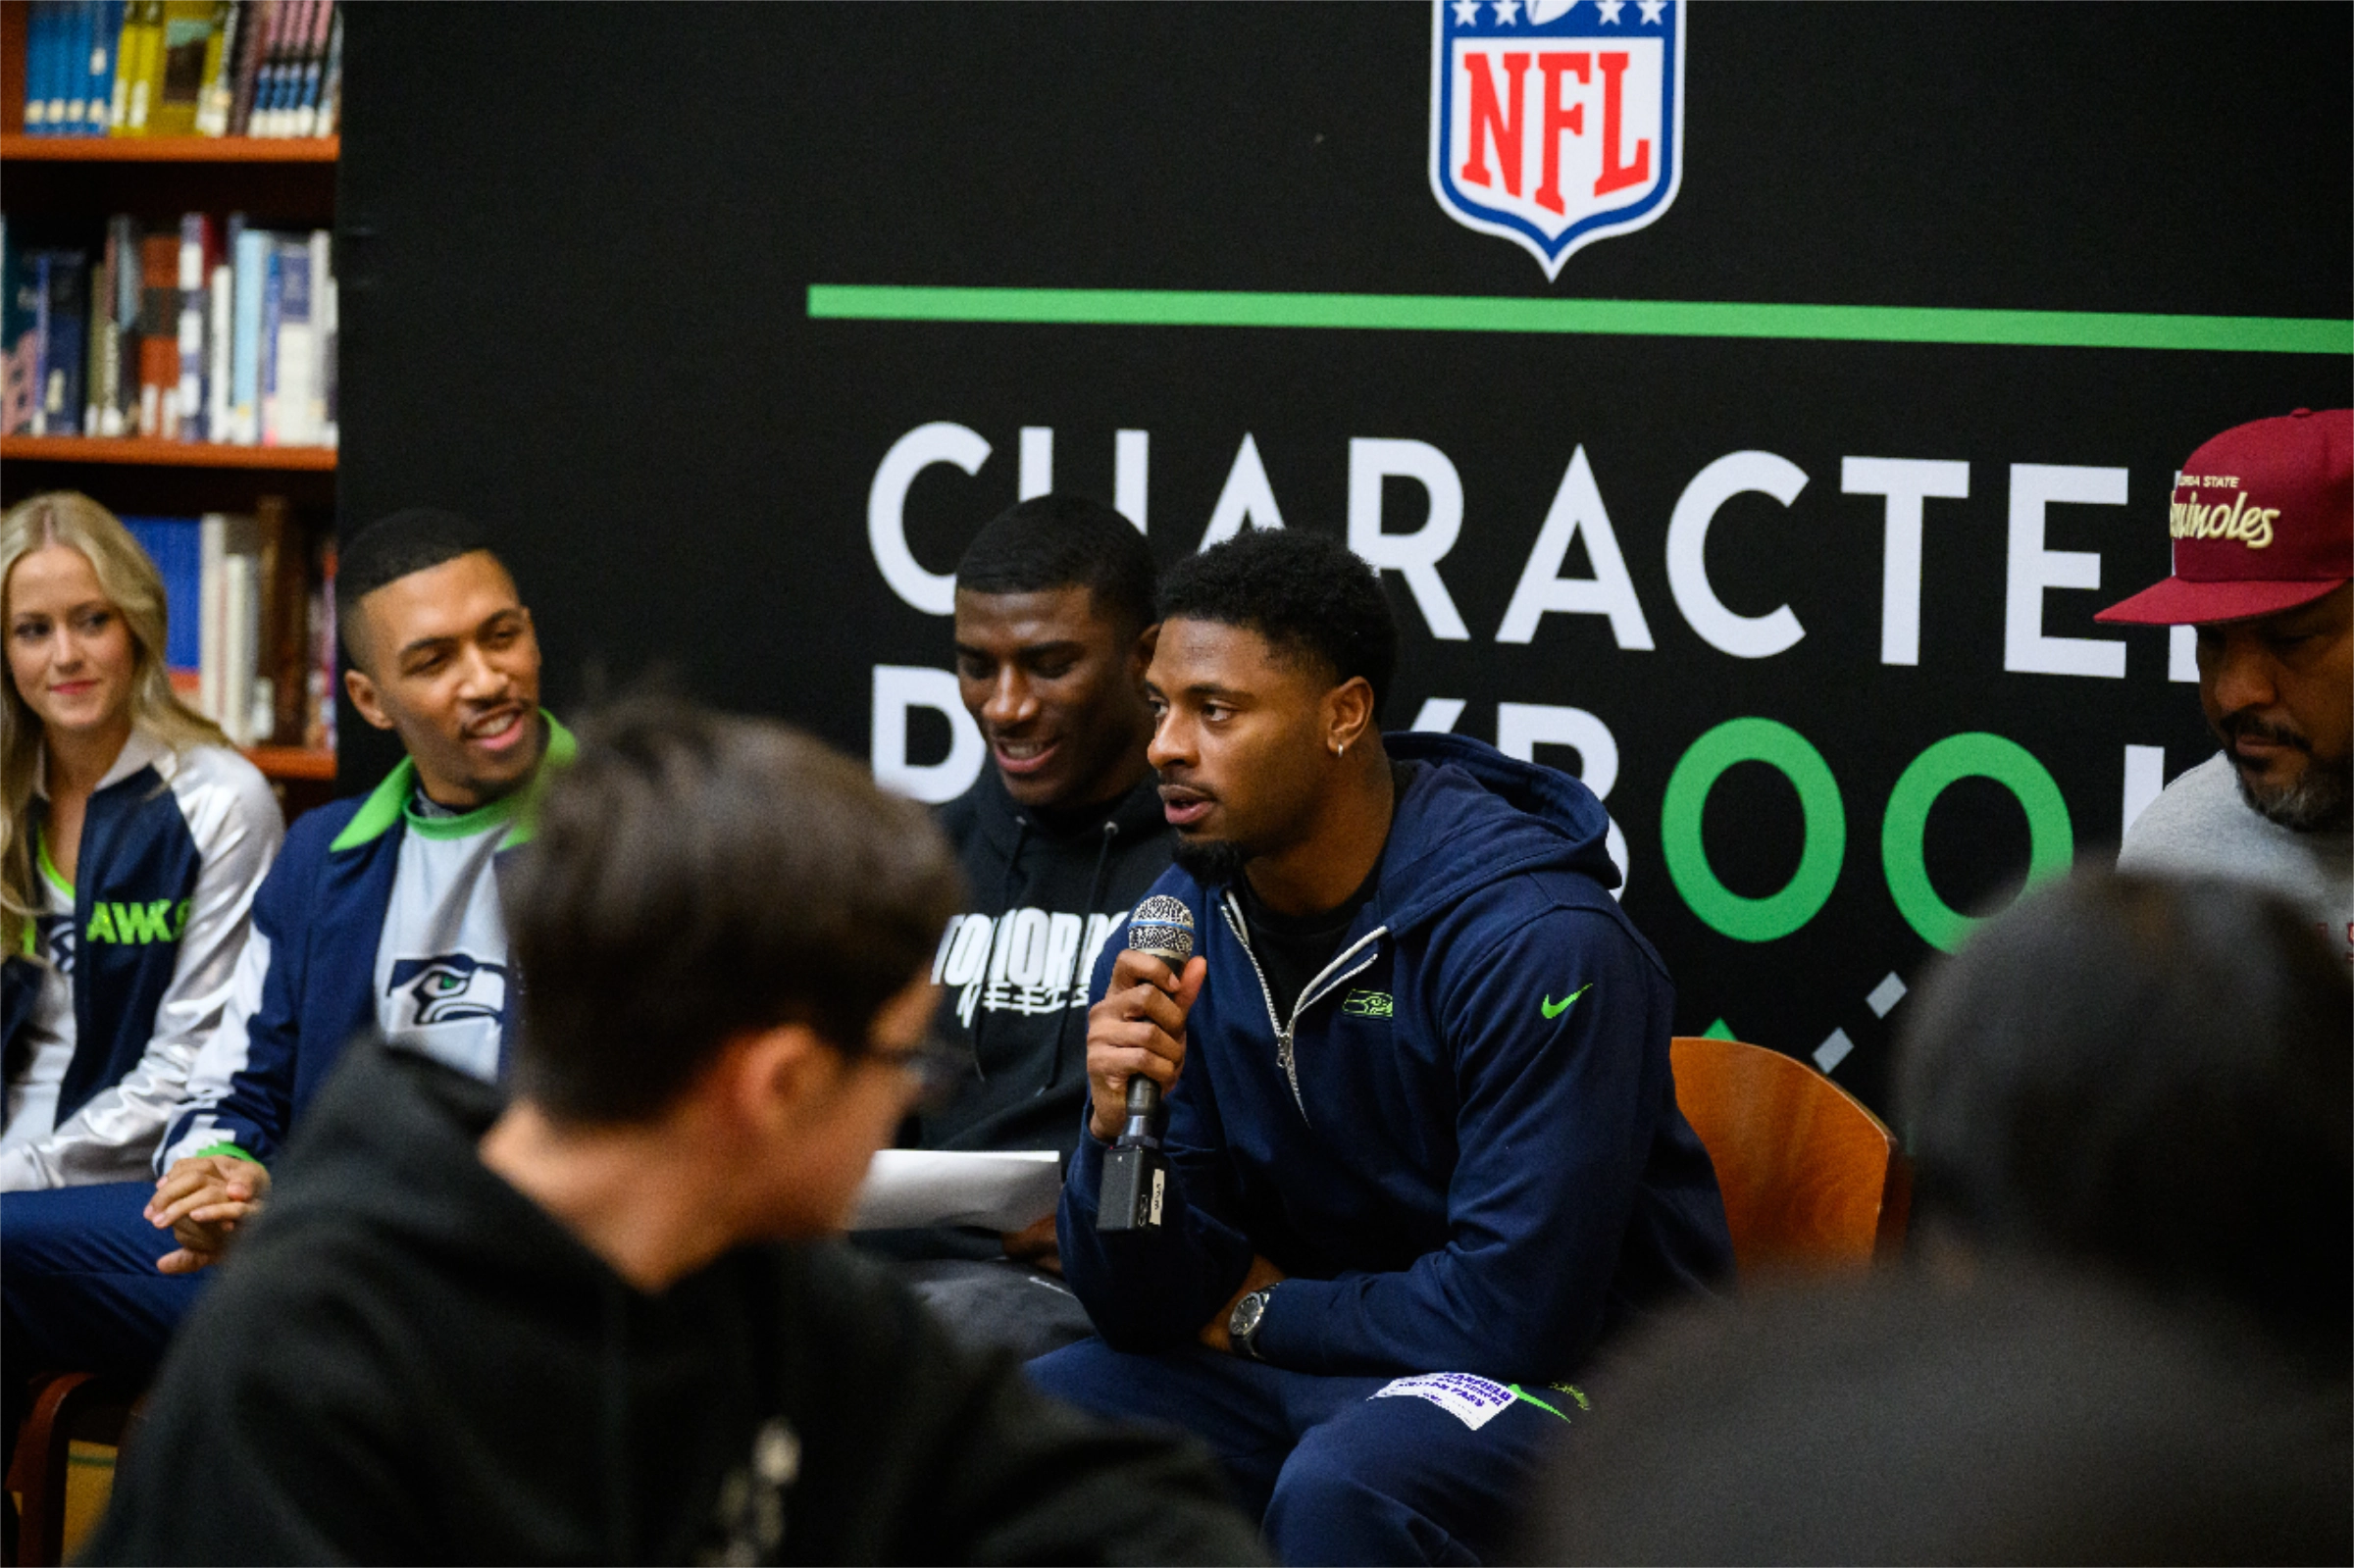 Seahawks players speak to students in library